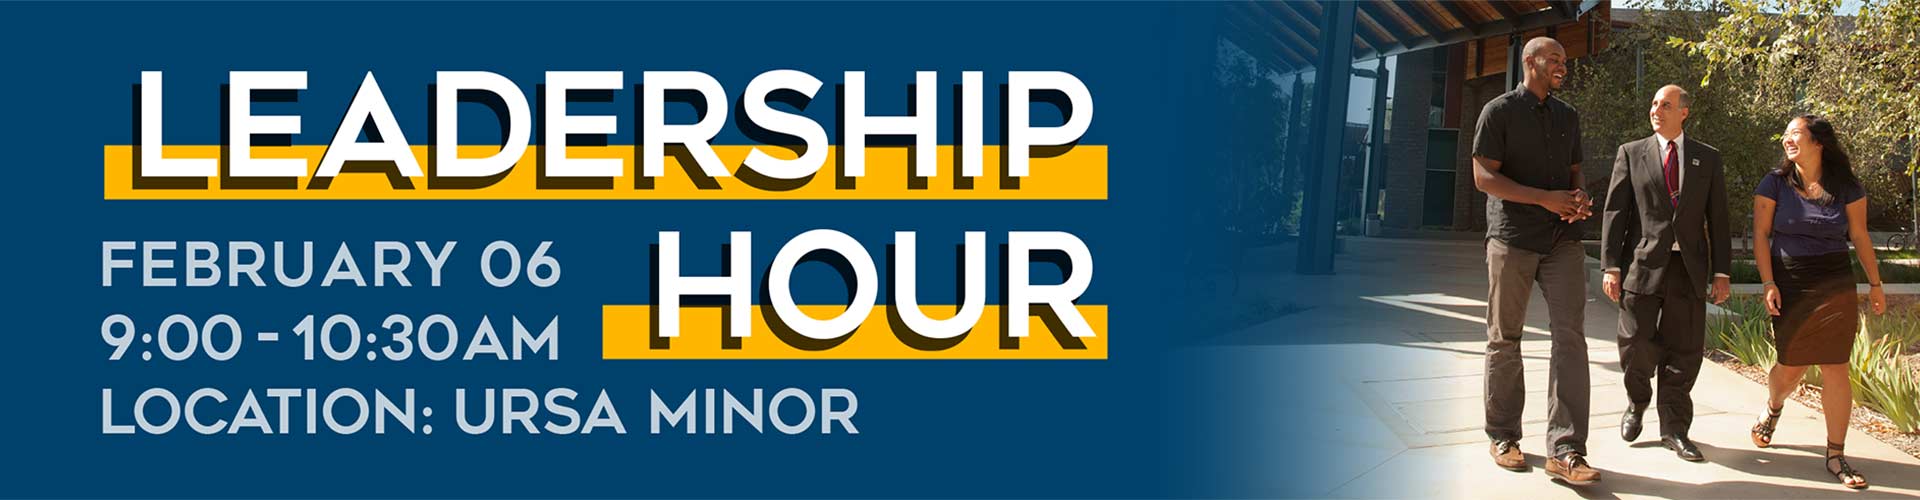 leadership hour from 9-10:30 in ursa minor on february 6th